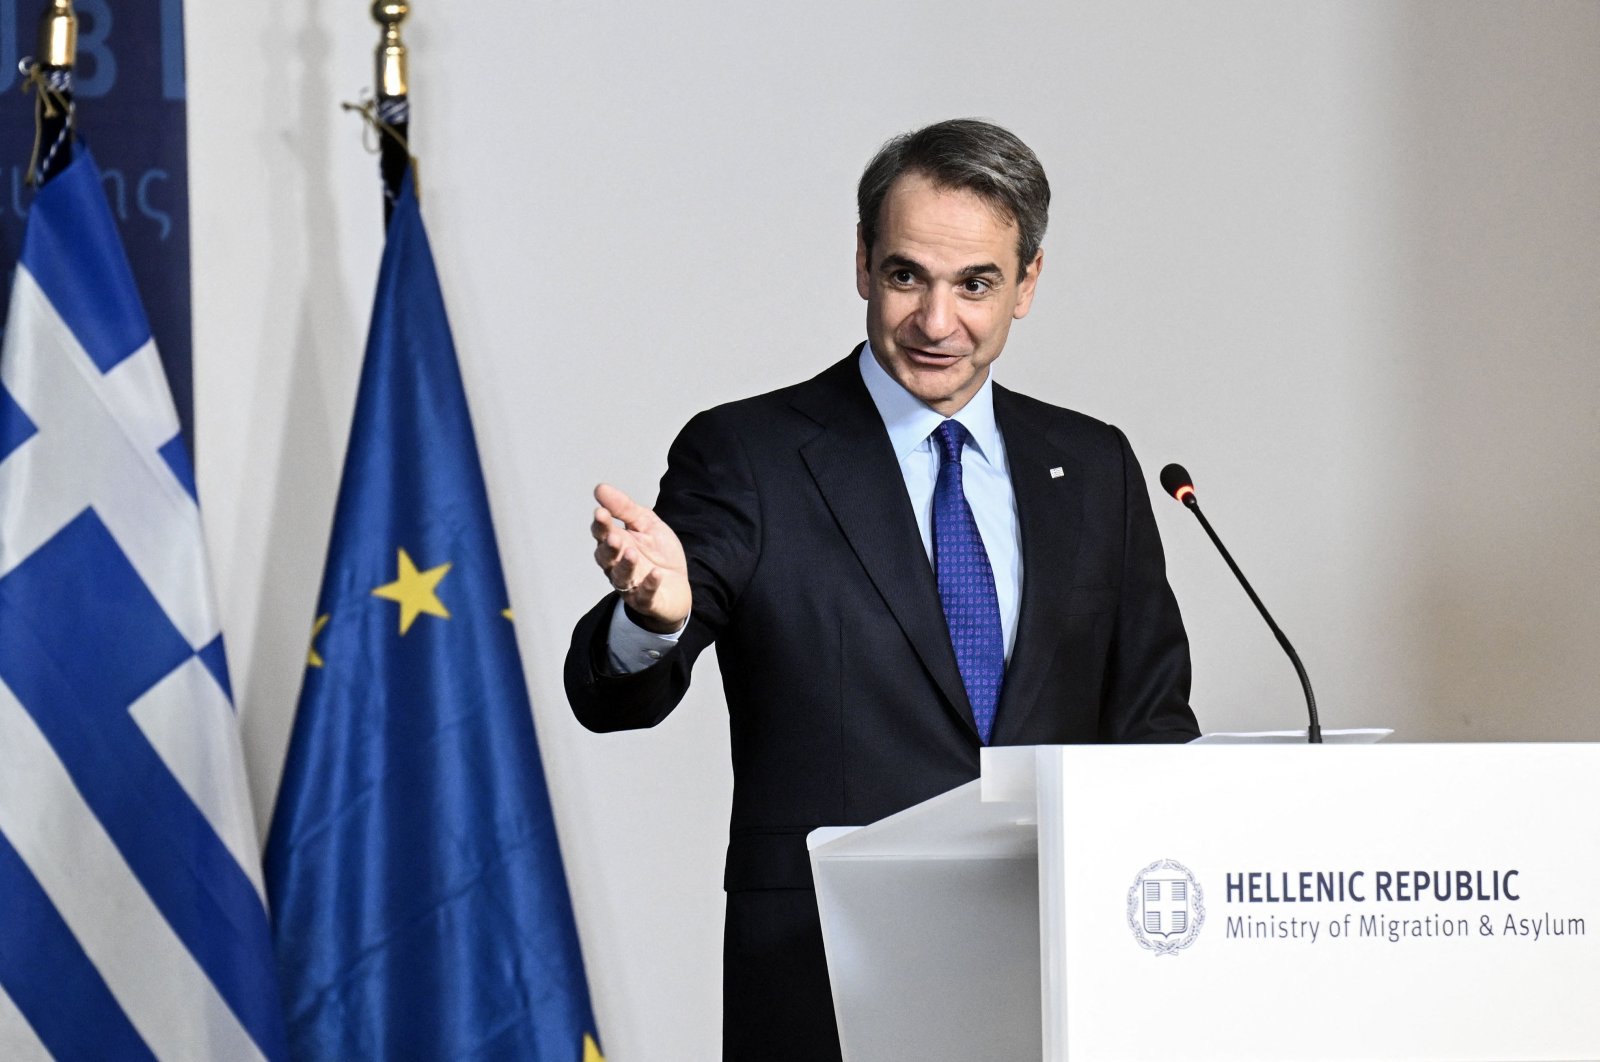 Greek Prime Minister Kyriakos Mitsotakis gestures as he talks at a lectern during a panel discussing the details of a preliminary EU agreement on migration management at the Ministry of Migration and Asylum in Athens, on Jan. 8, 2024. (AFP Photo)